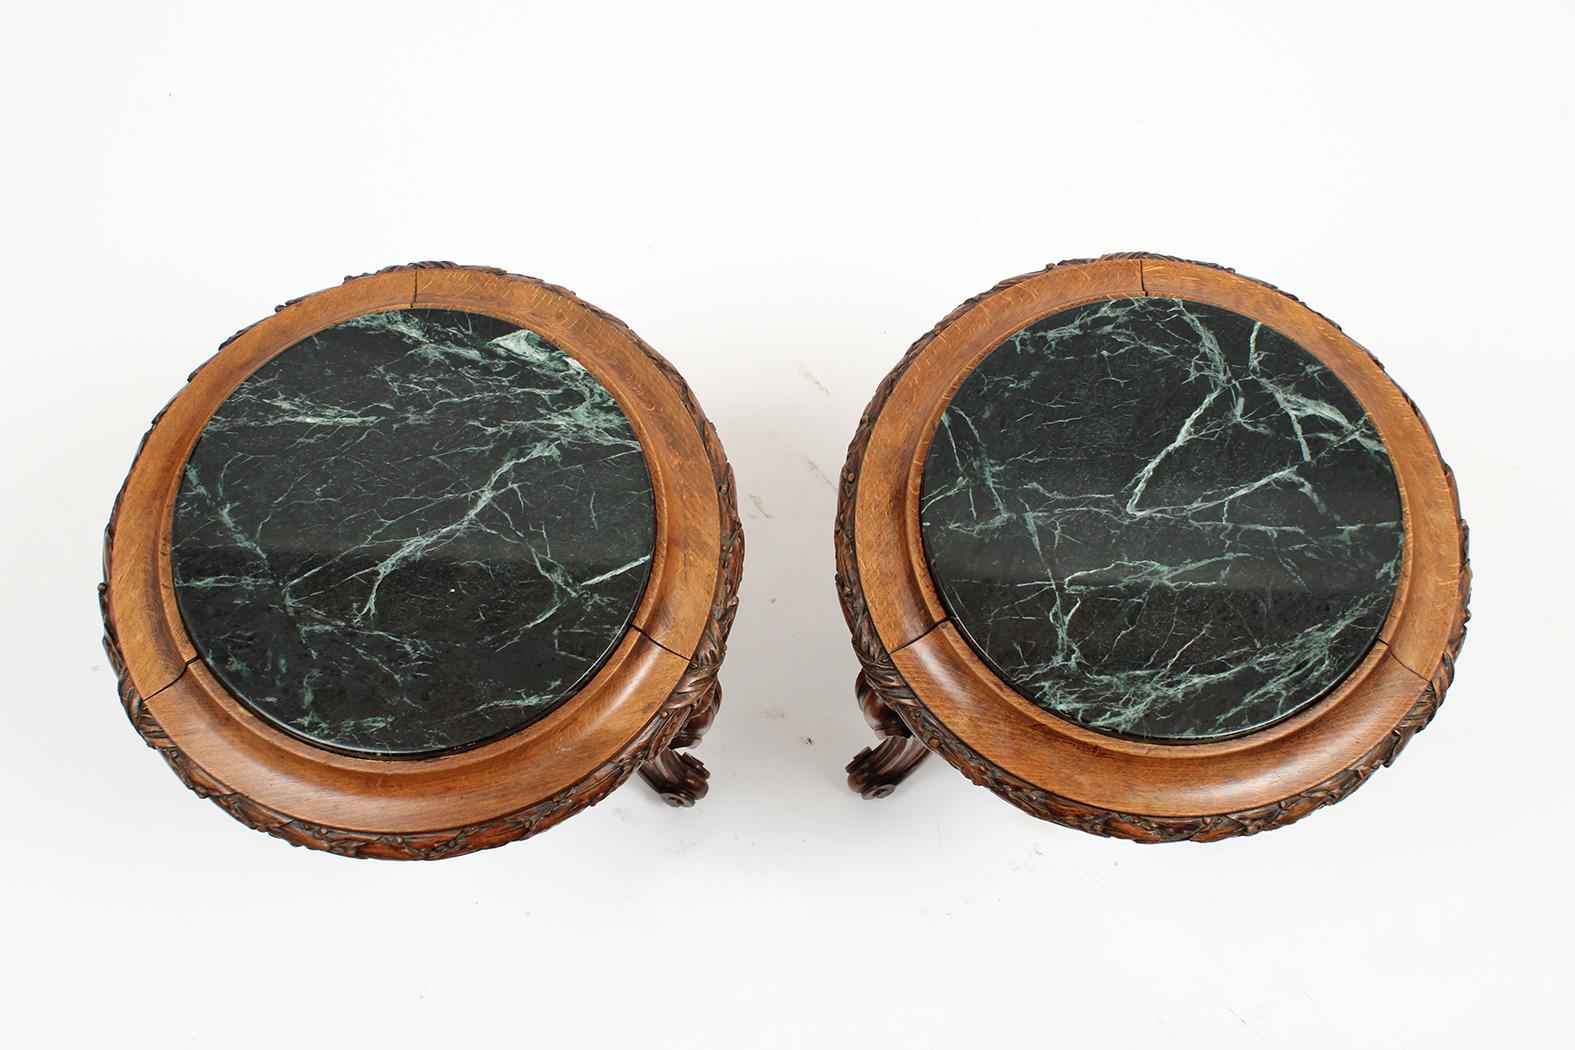 This beautiful pair of 19th century Louis XVI style garden stools are made out of solid walnut wood and features an intricately carved molding along the top and legs. Each leg has a carved seashell and scroll design. The pair also comes with the